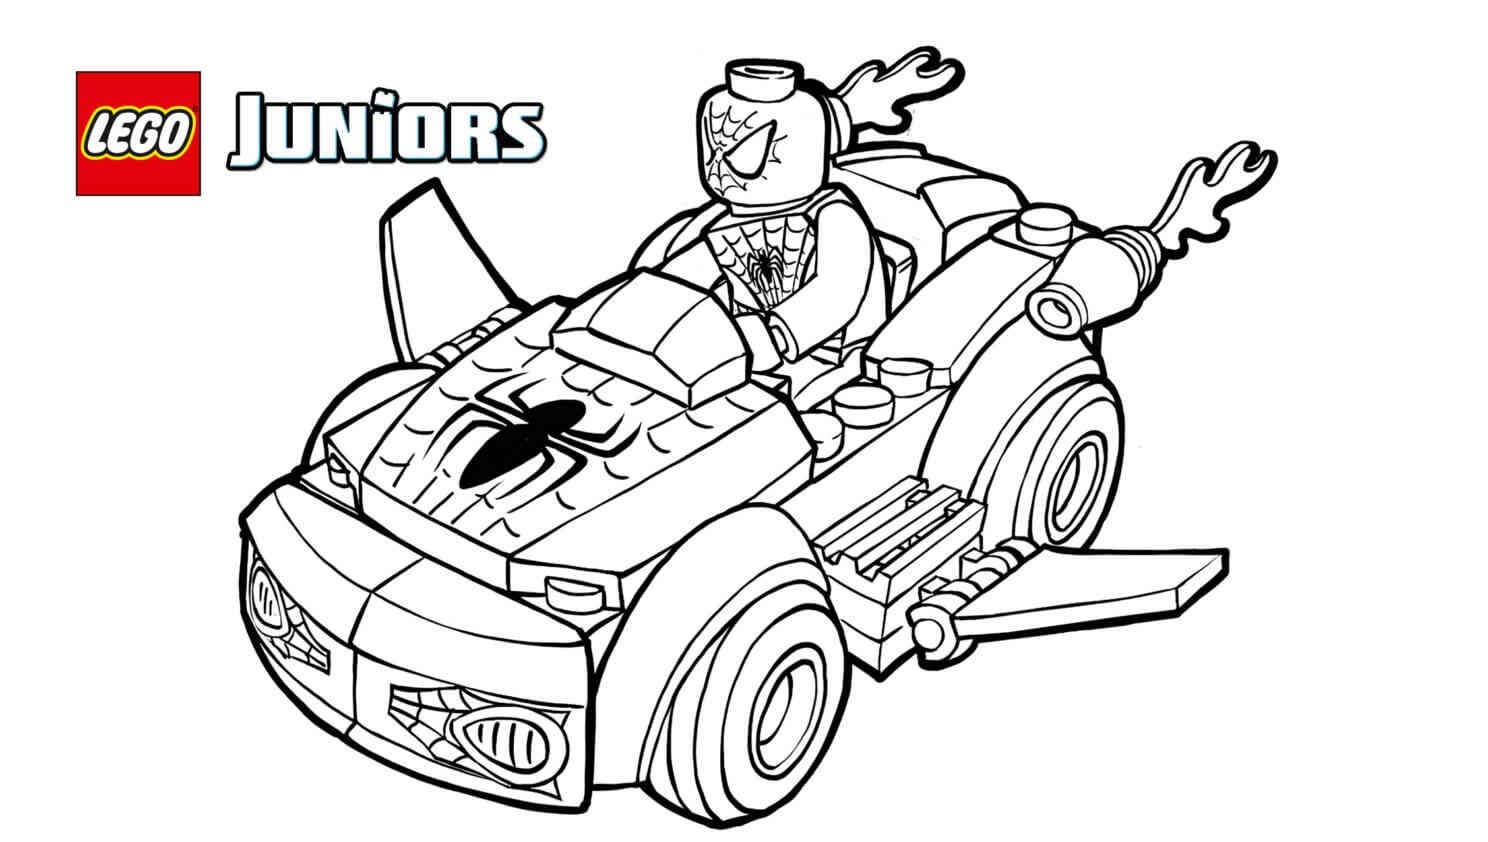 Lego Junior Spiderman Avengers Coloring Pages